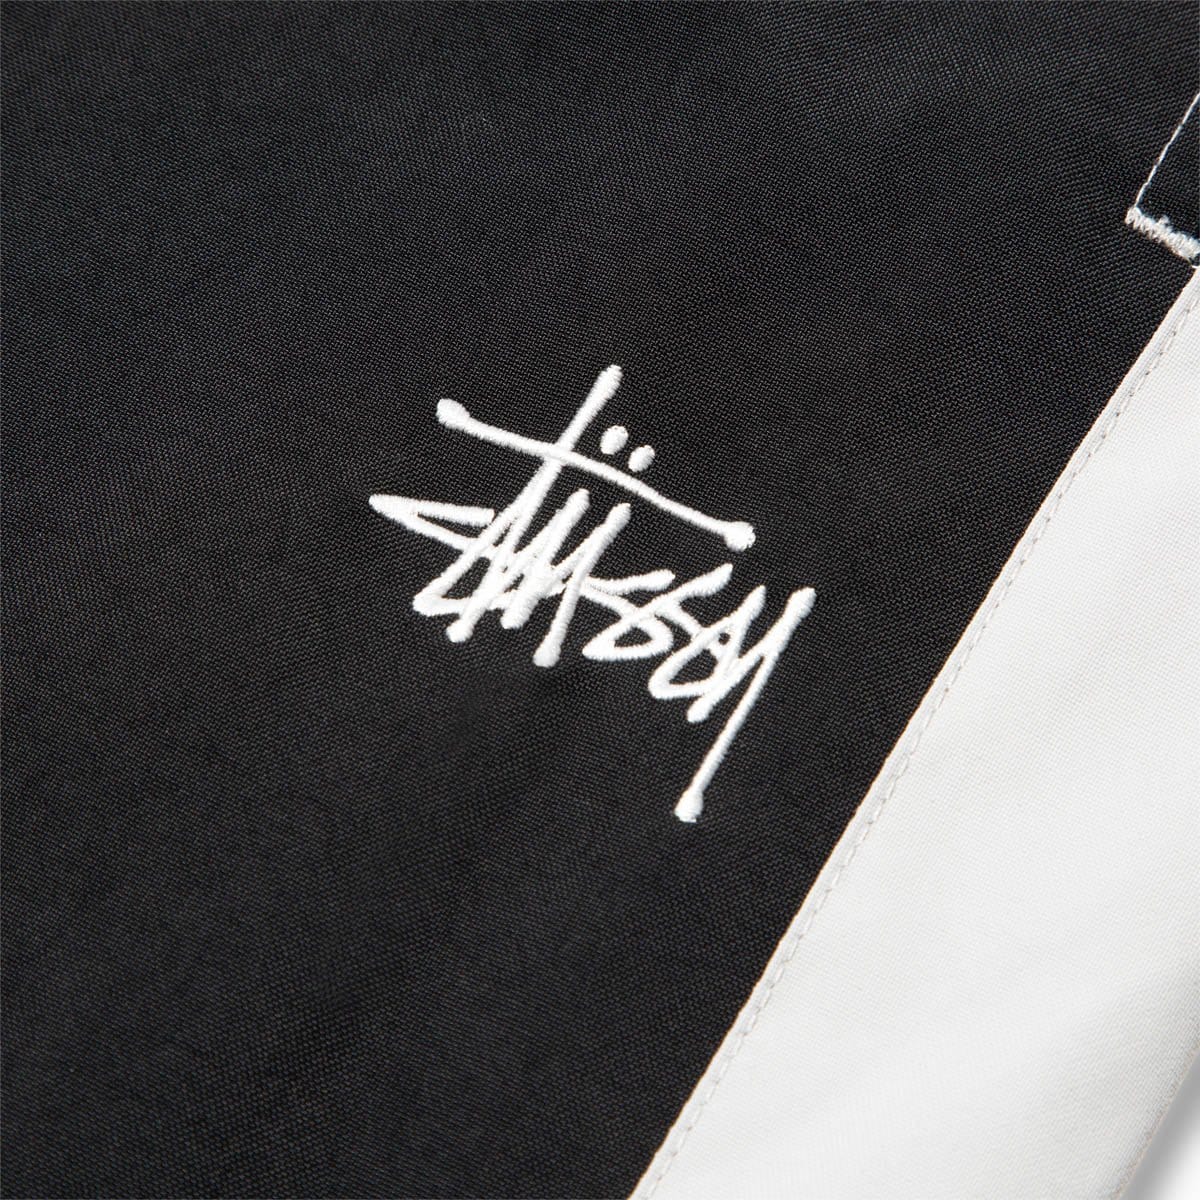 Stüssy Bottoms PANEL TRACK RELAXED PANT